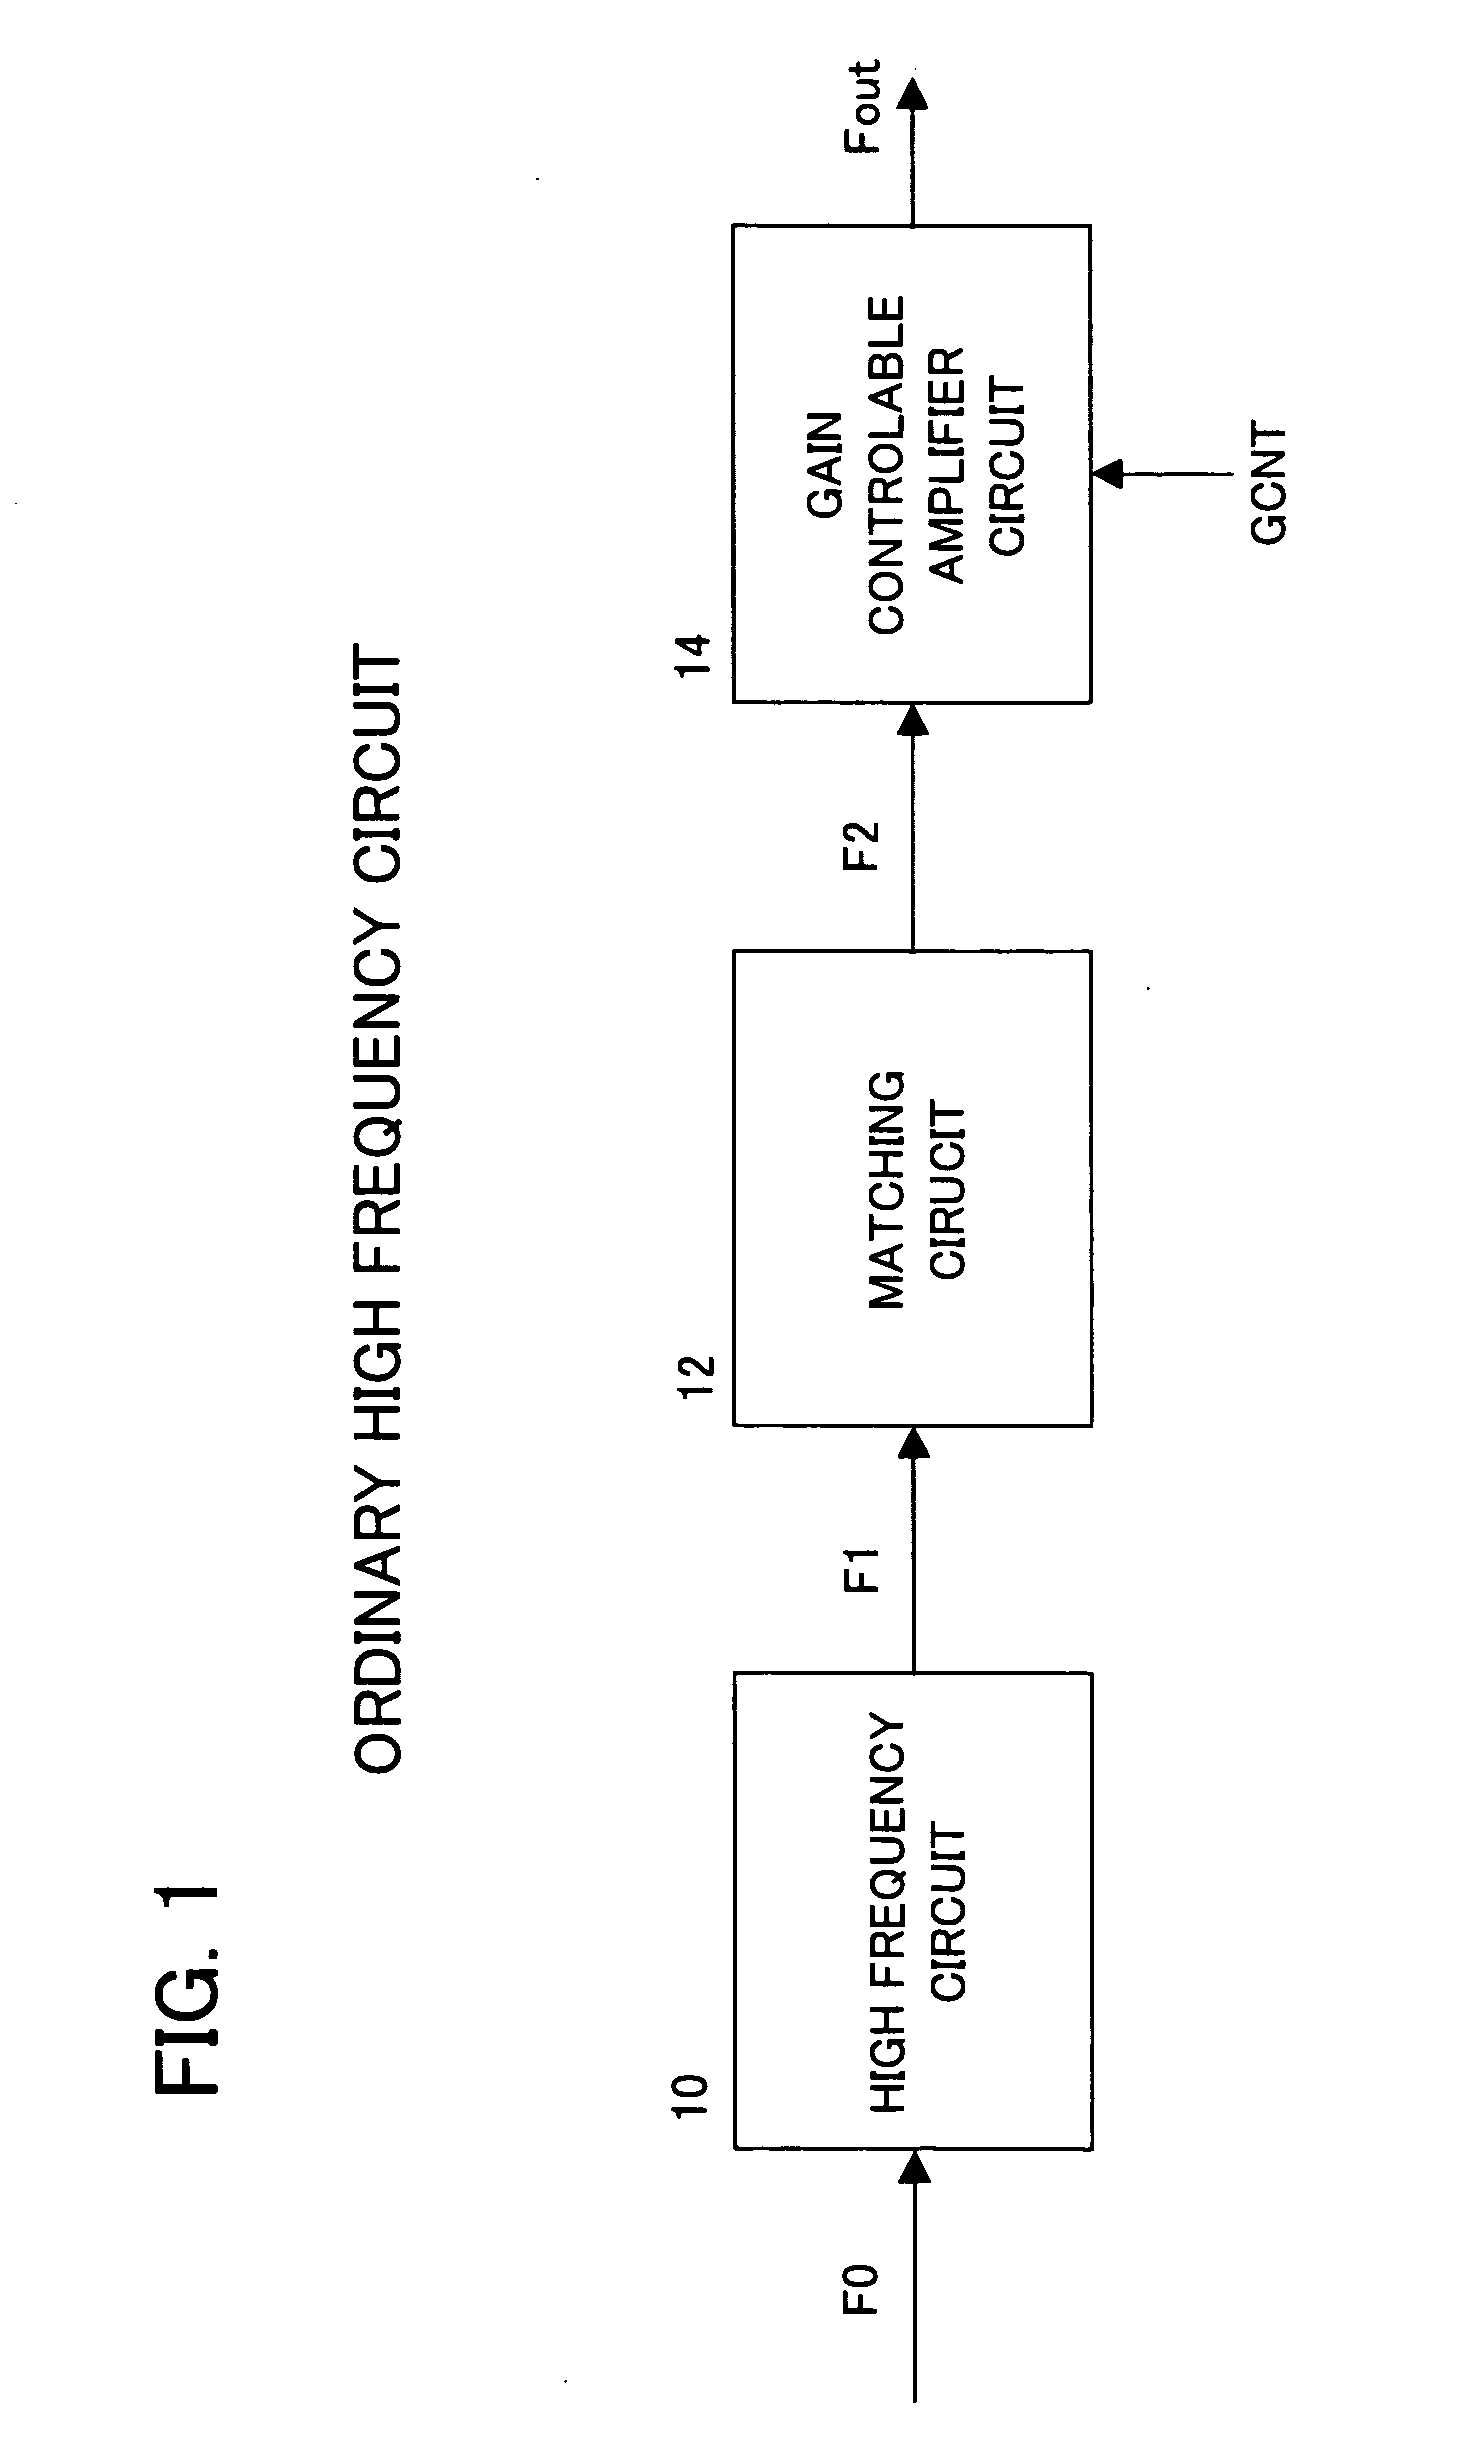 High frequency amplifier circuit permitting variable gain control